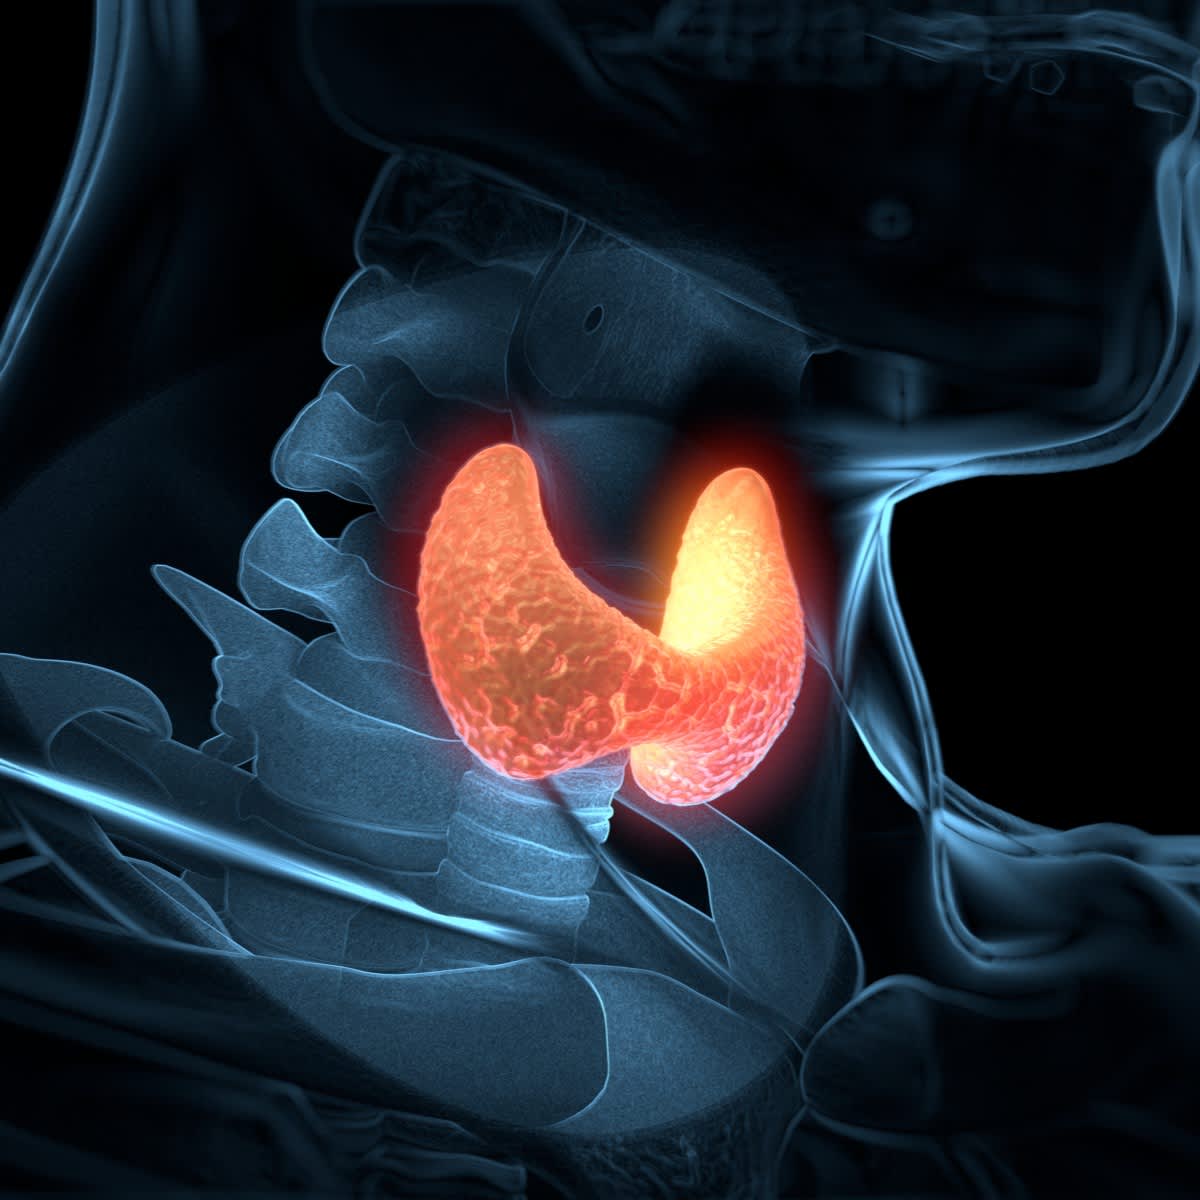 The image shows the thyroid gland, which is located in the lower part of the neck and at the front, on both sides of the trachea.